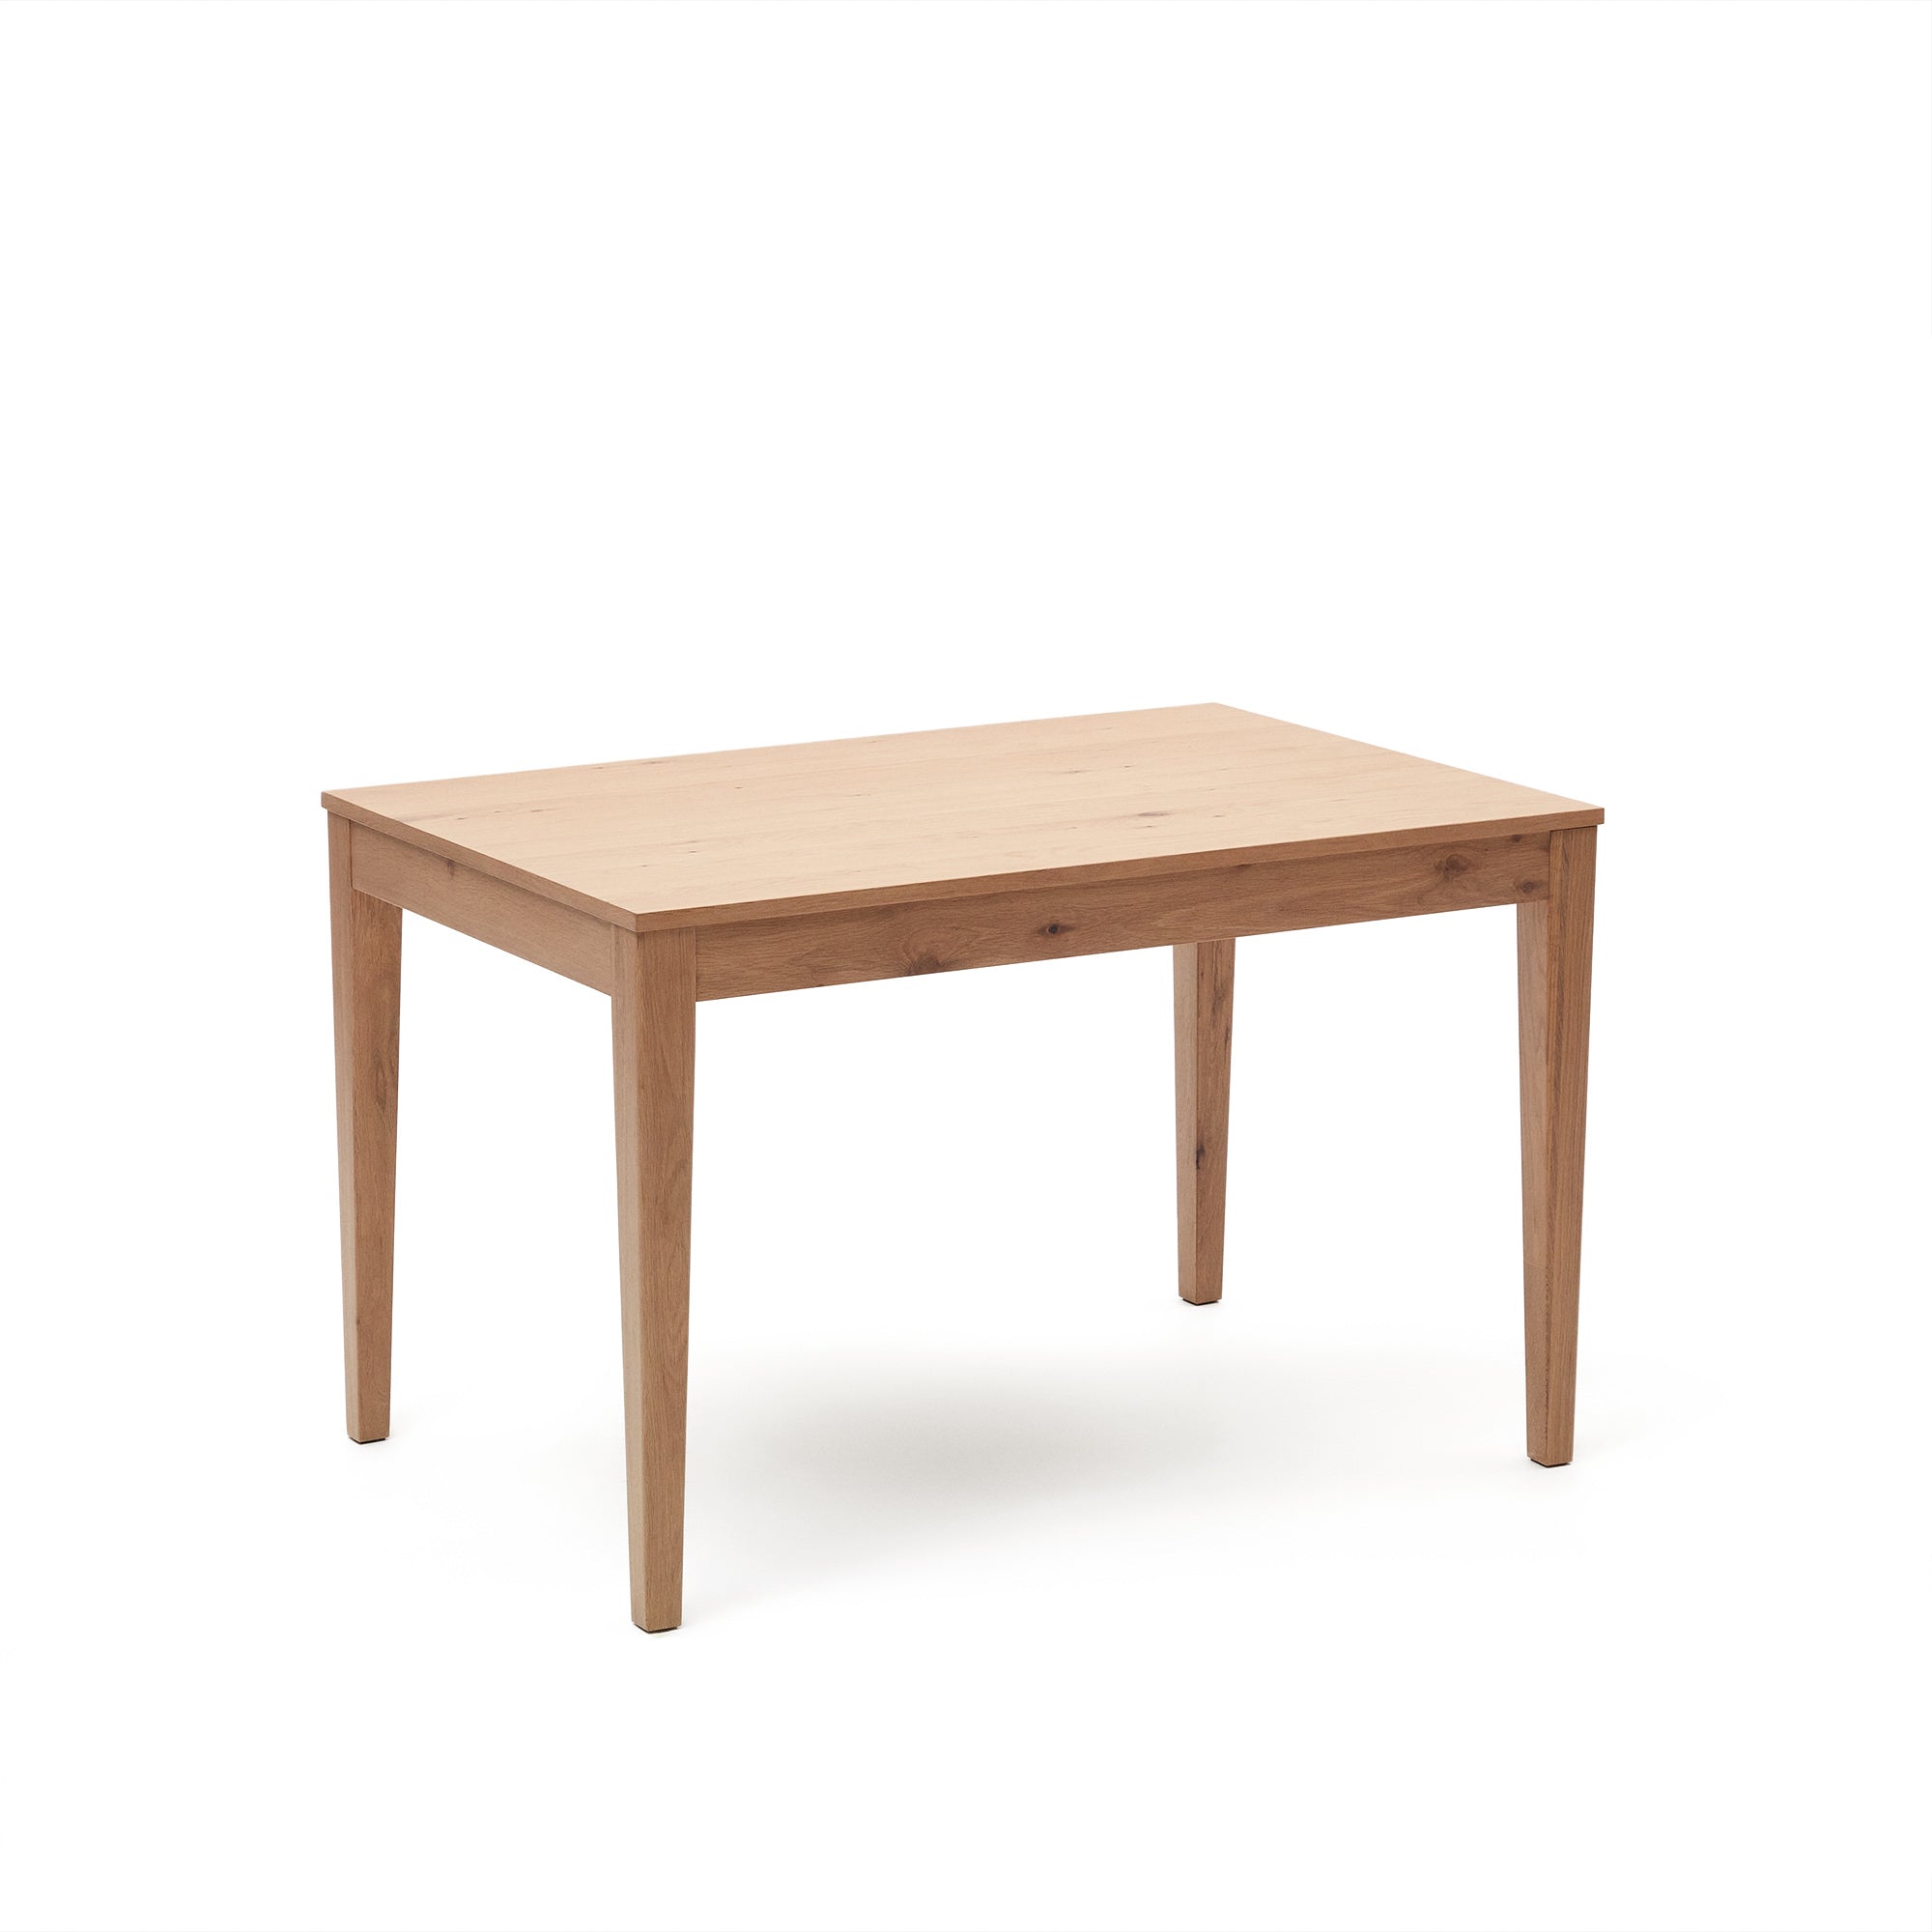 Yain extendable table with oak veneer and solid oak, 120 (180) x 80 cm